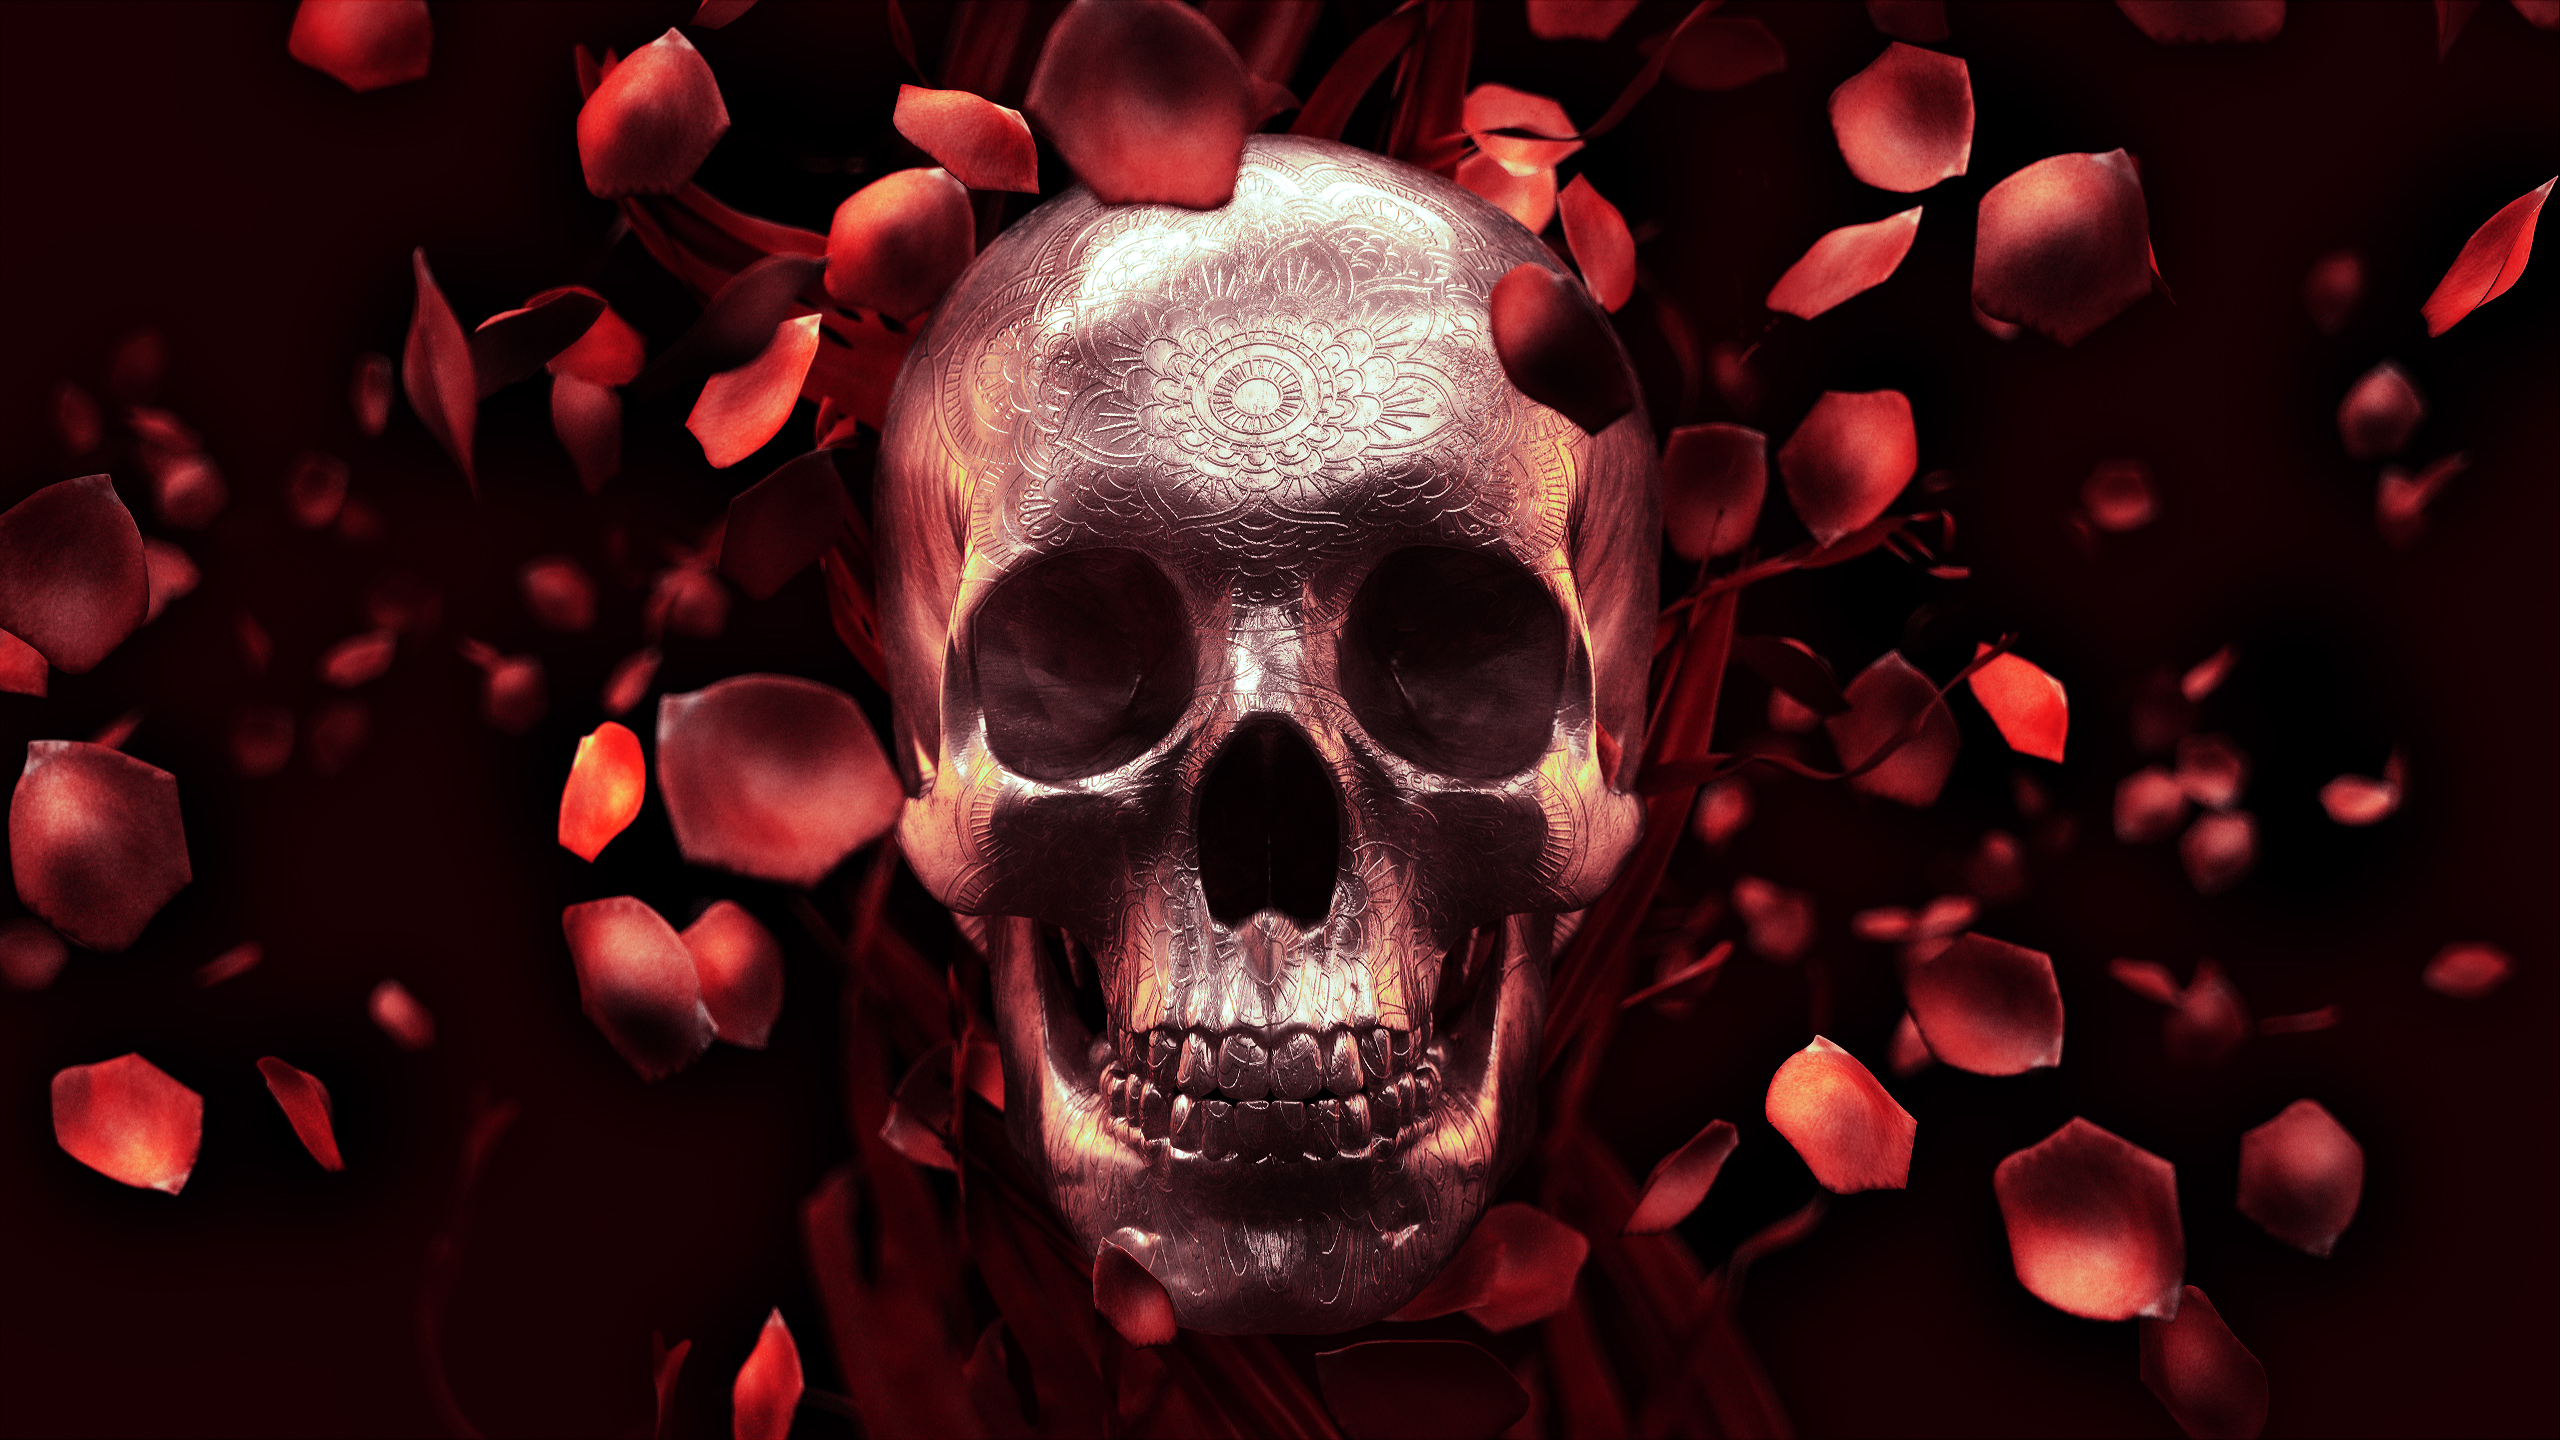 Skull And Roses Wallpaper High Quality Resolution #901 • Other at ...